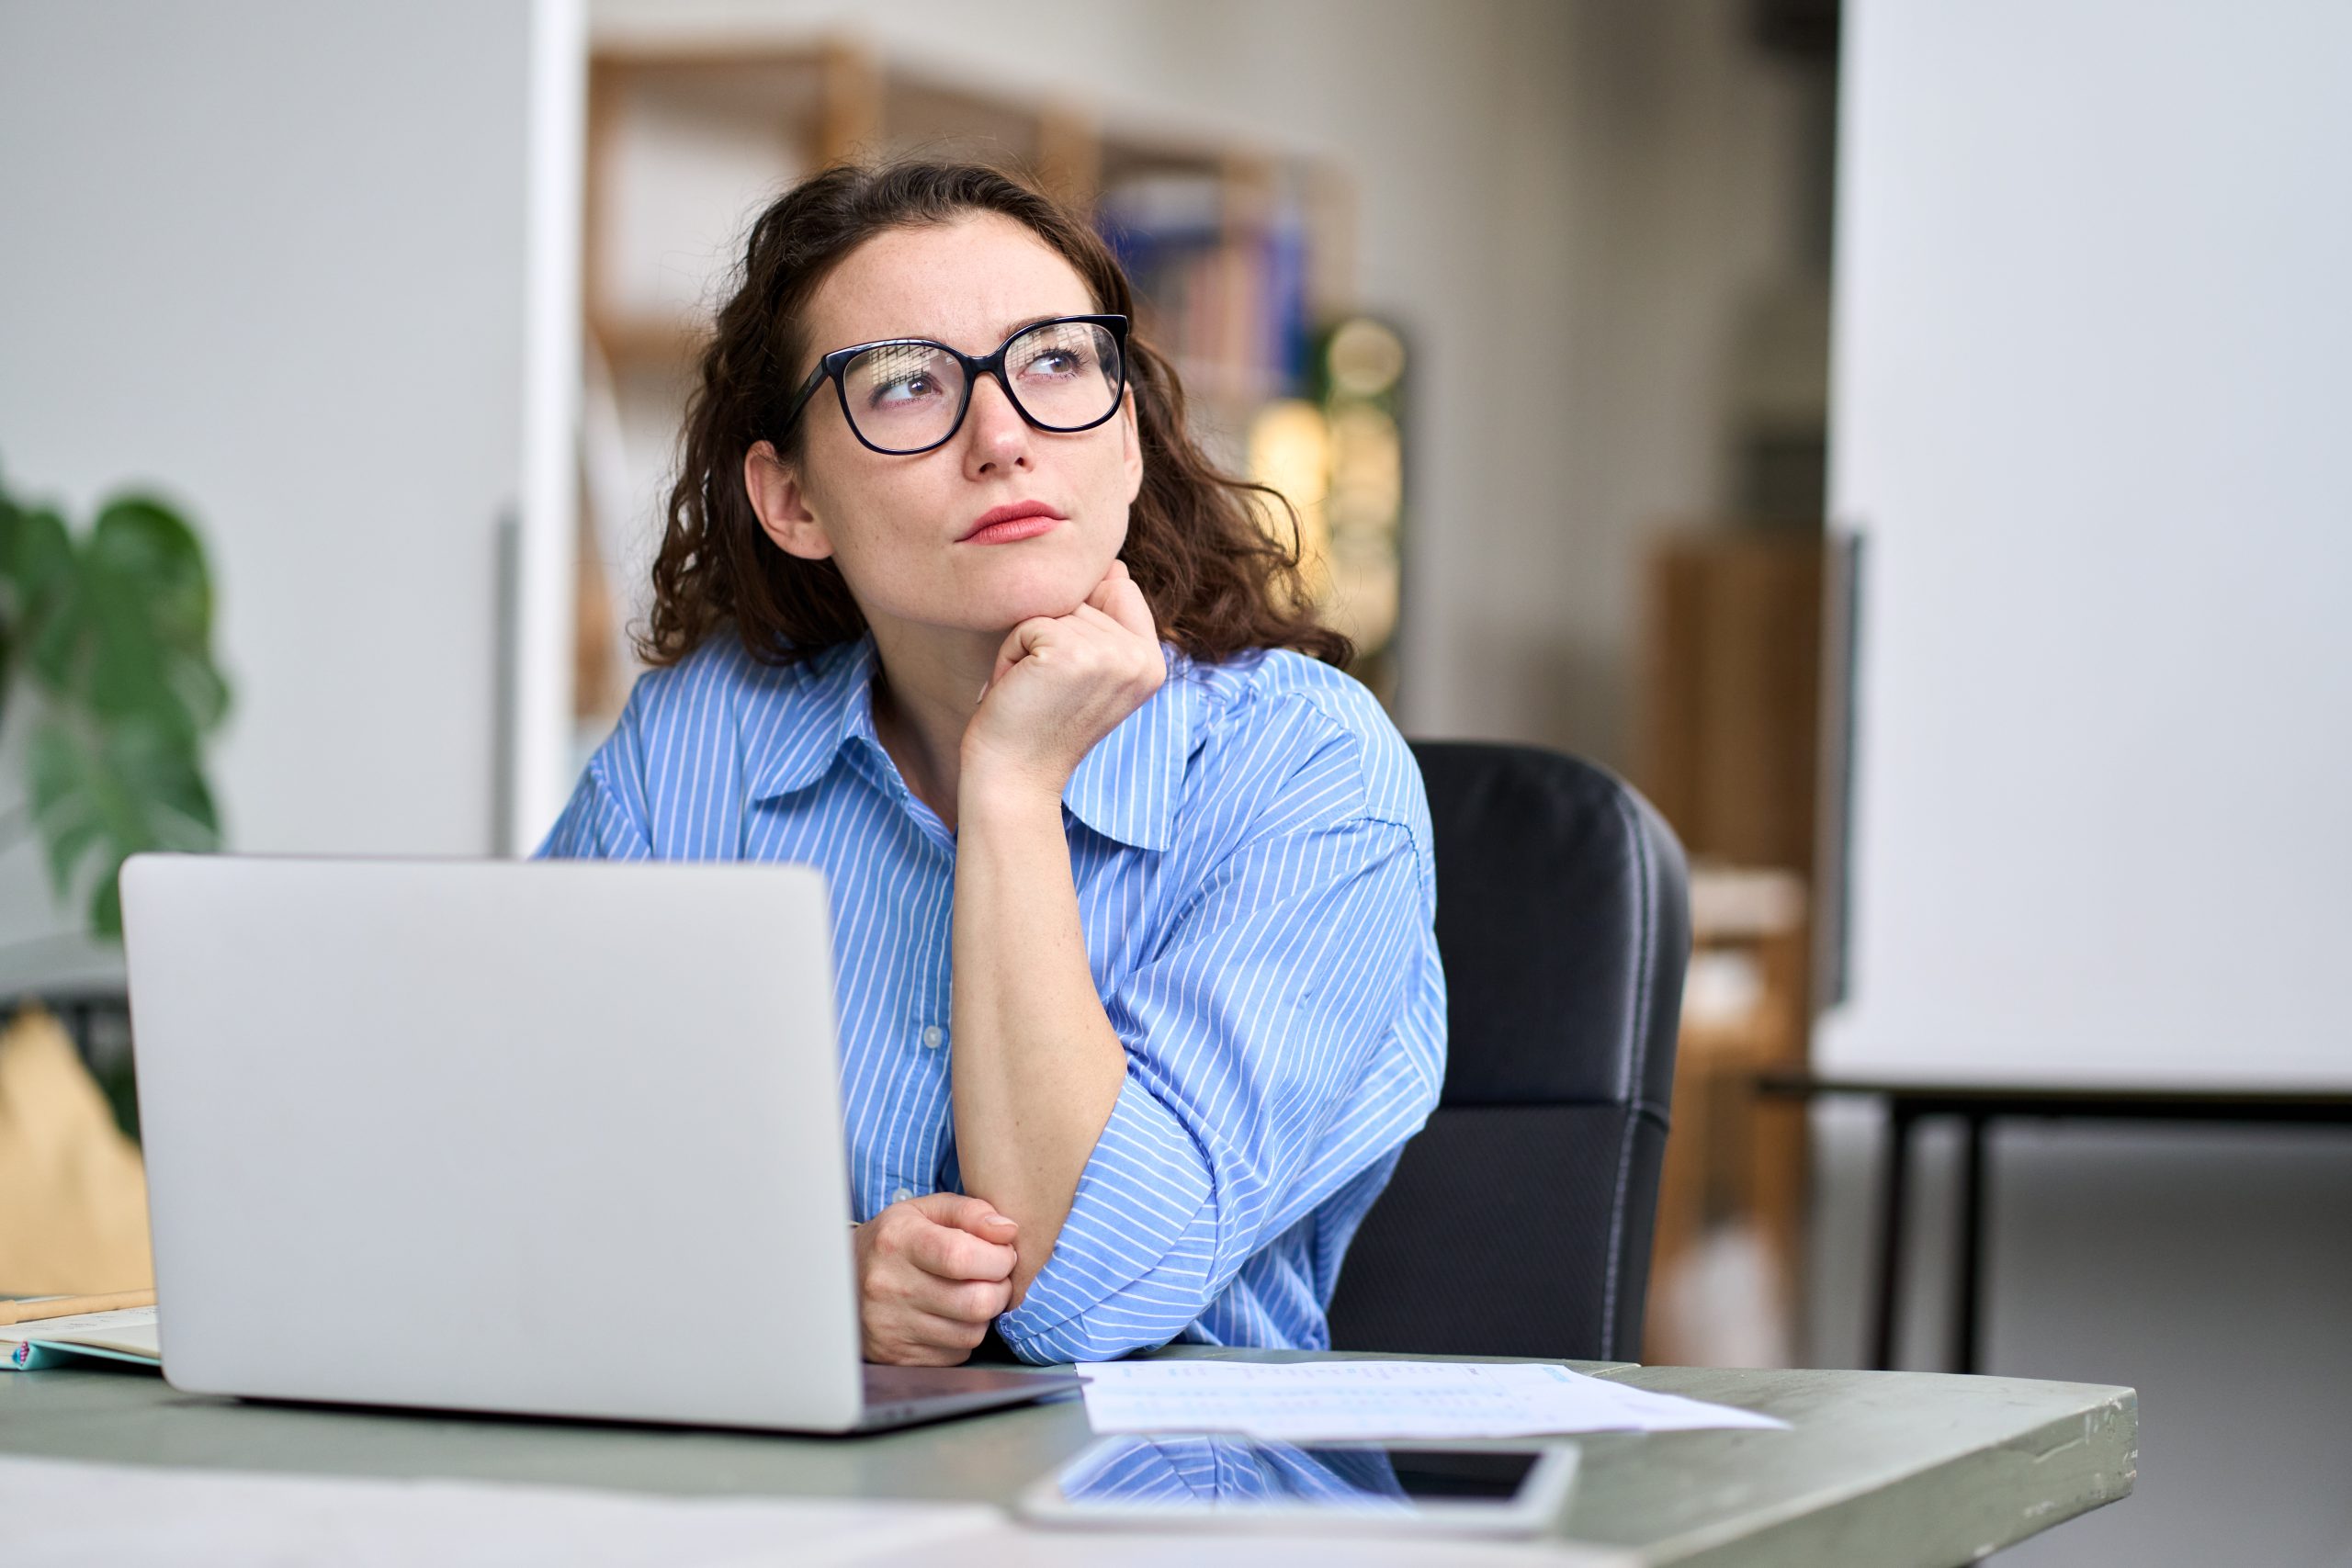 Thoughtful serious professional woman writing email